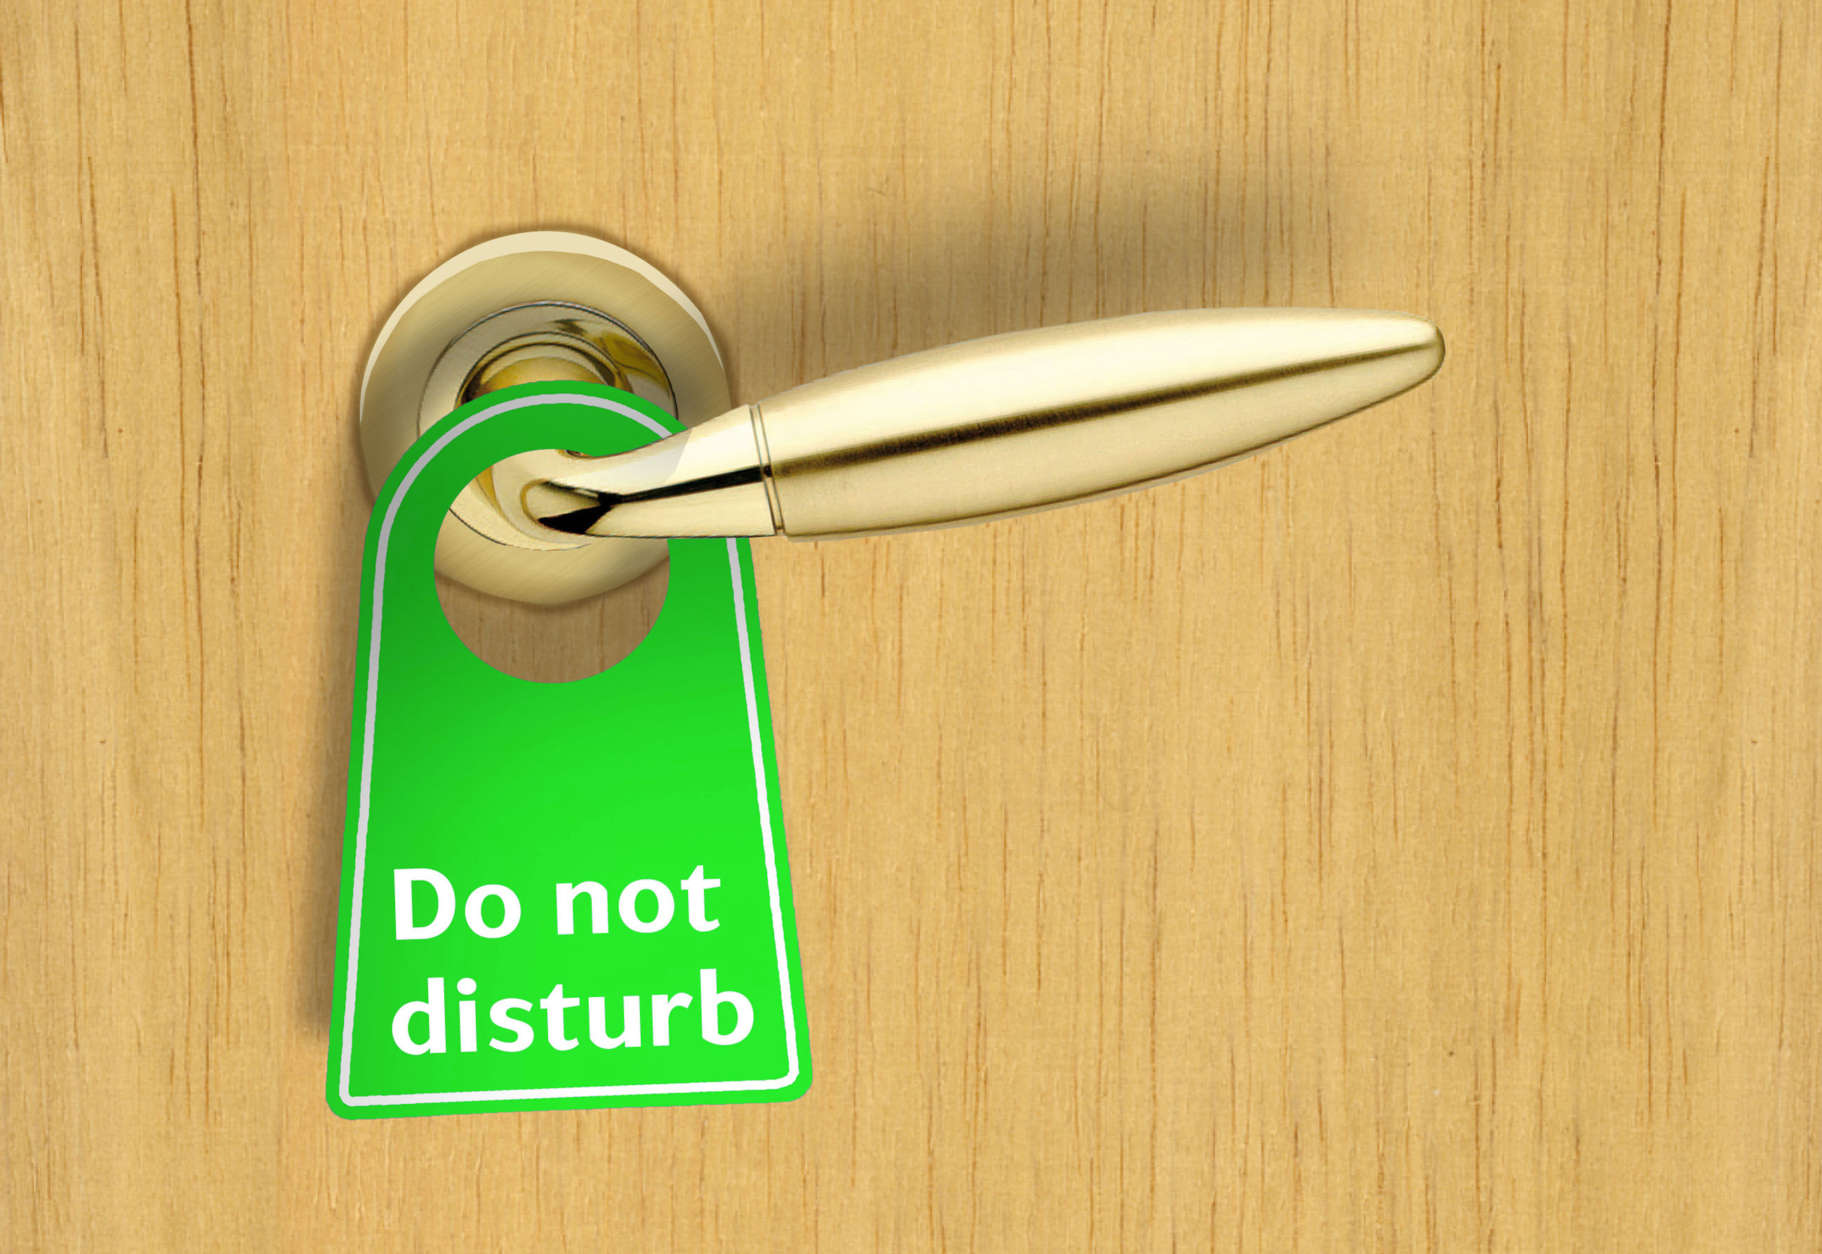 Hotel wood door with a Do not disturb sign